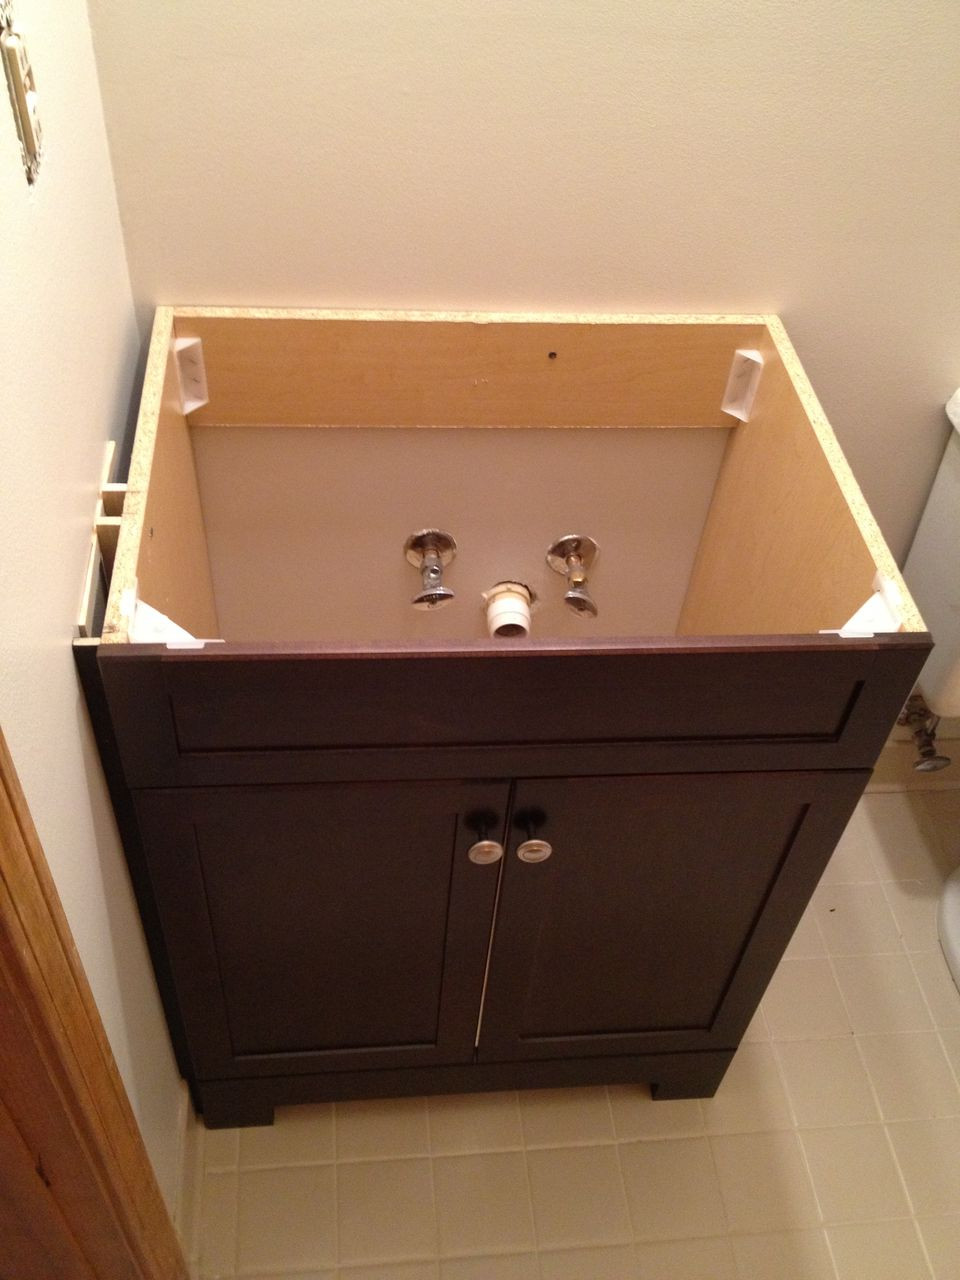 Replacing Bathroom Vanity
 How to Replace and Install a Bathroom Vanity